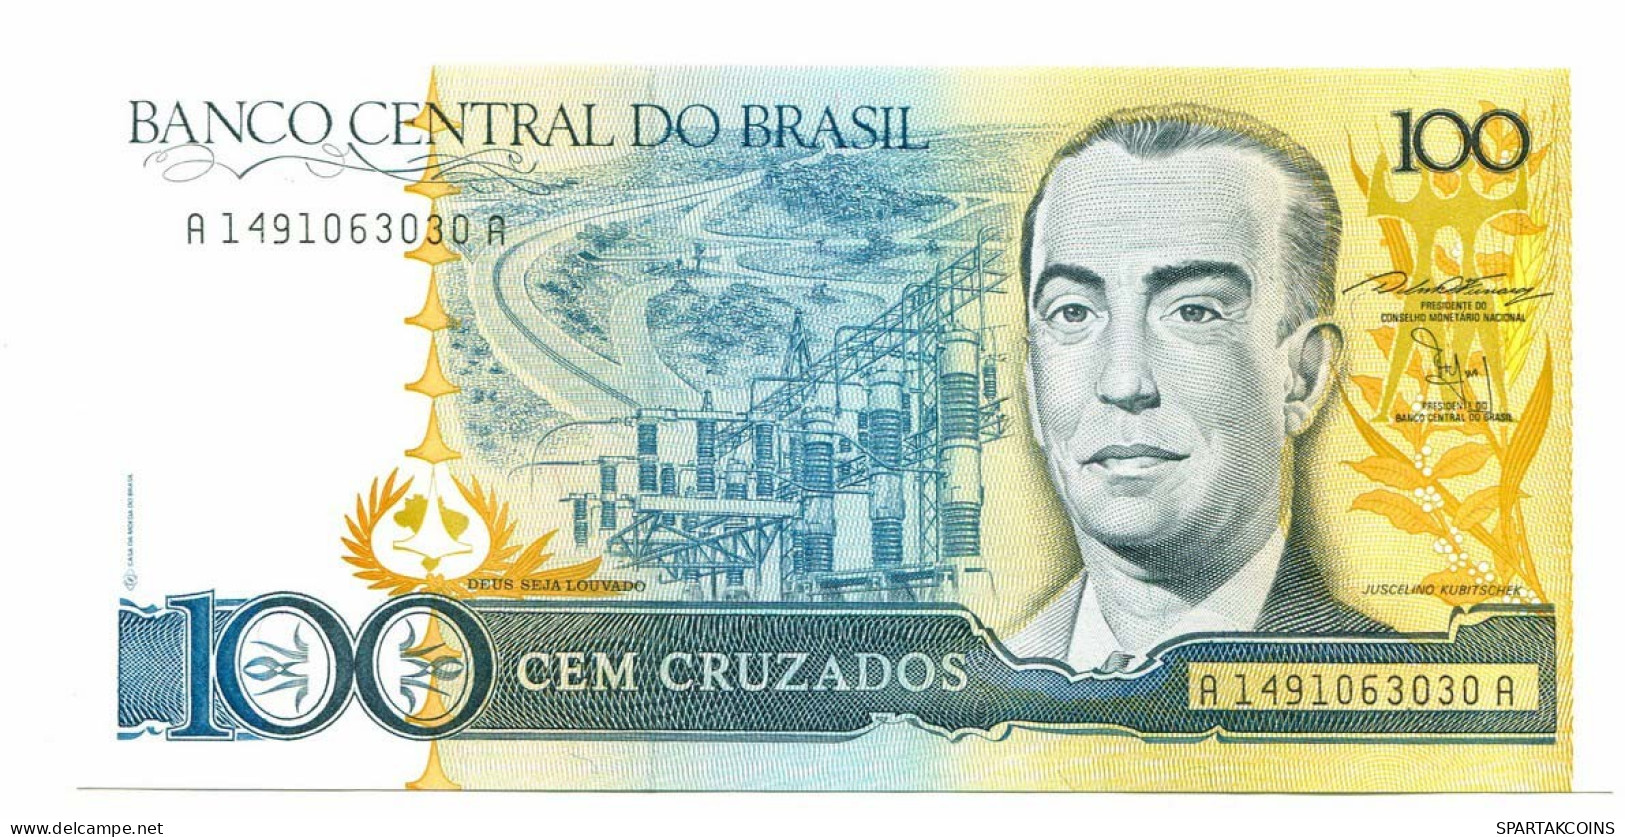 BRASIL 100 CRUZADOS 1987 UNC Paper Money Banknote #P10854.4 - [11] Local Banknote Issues